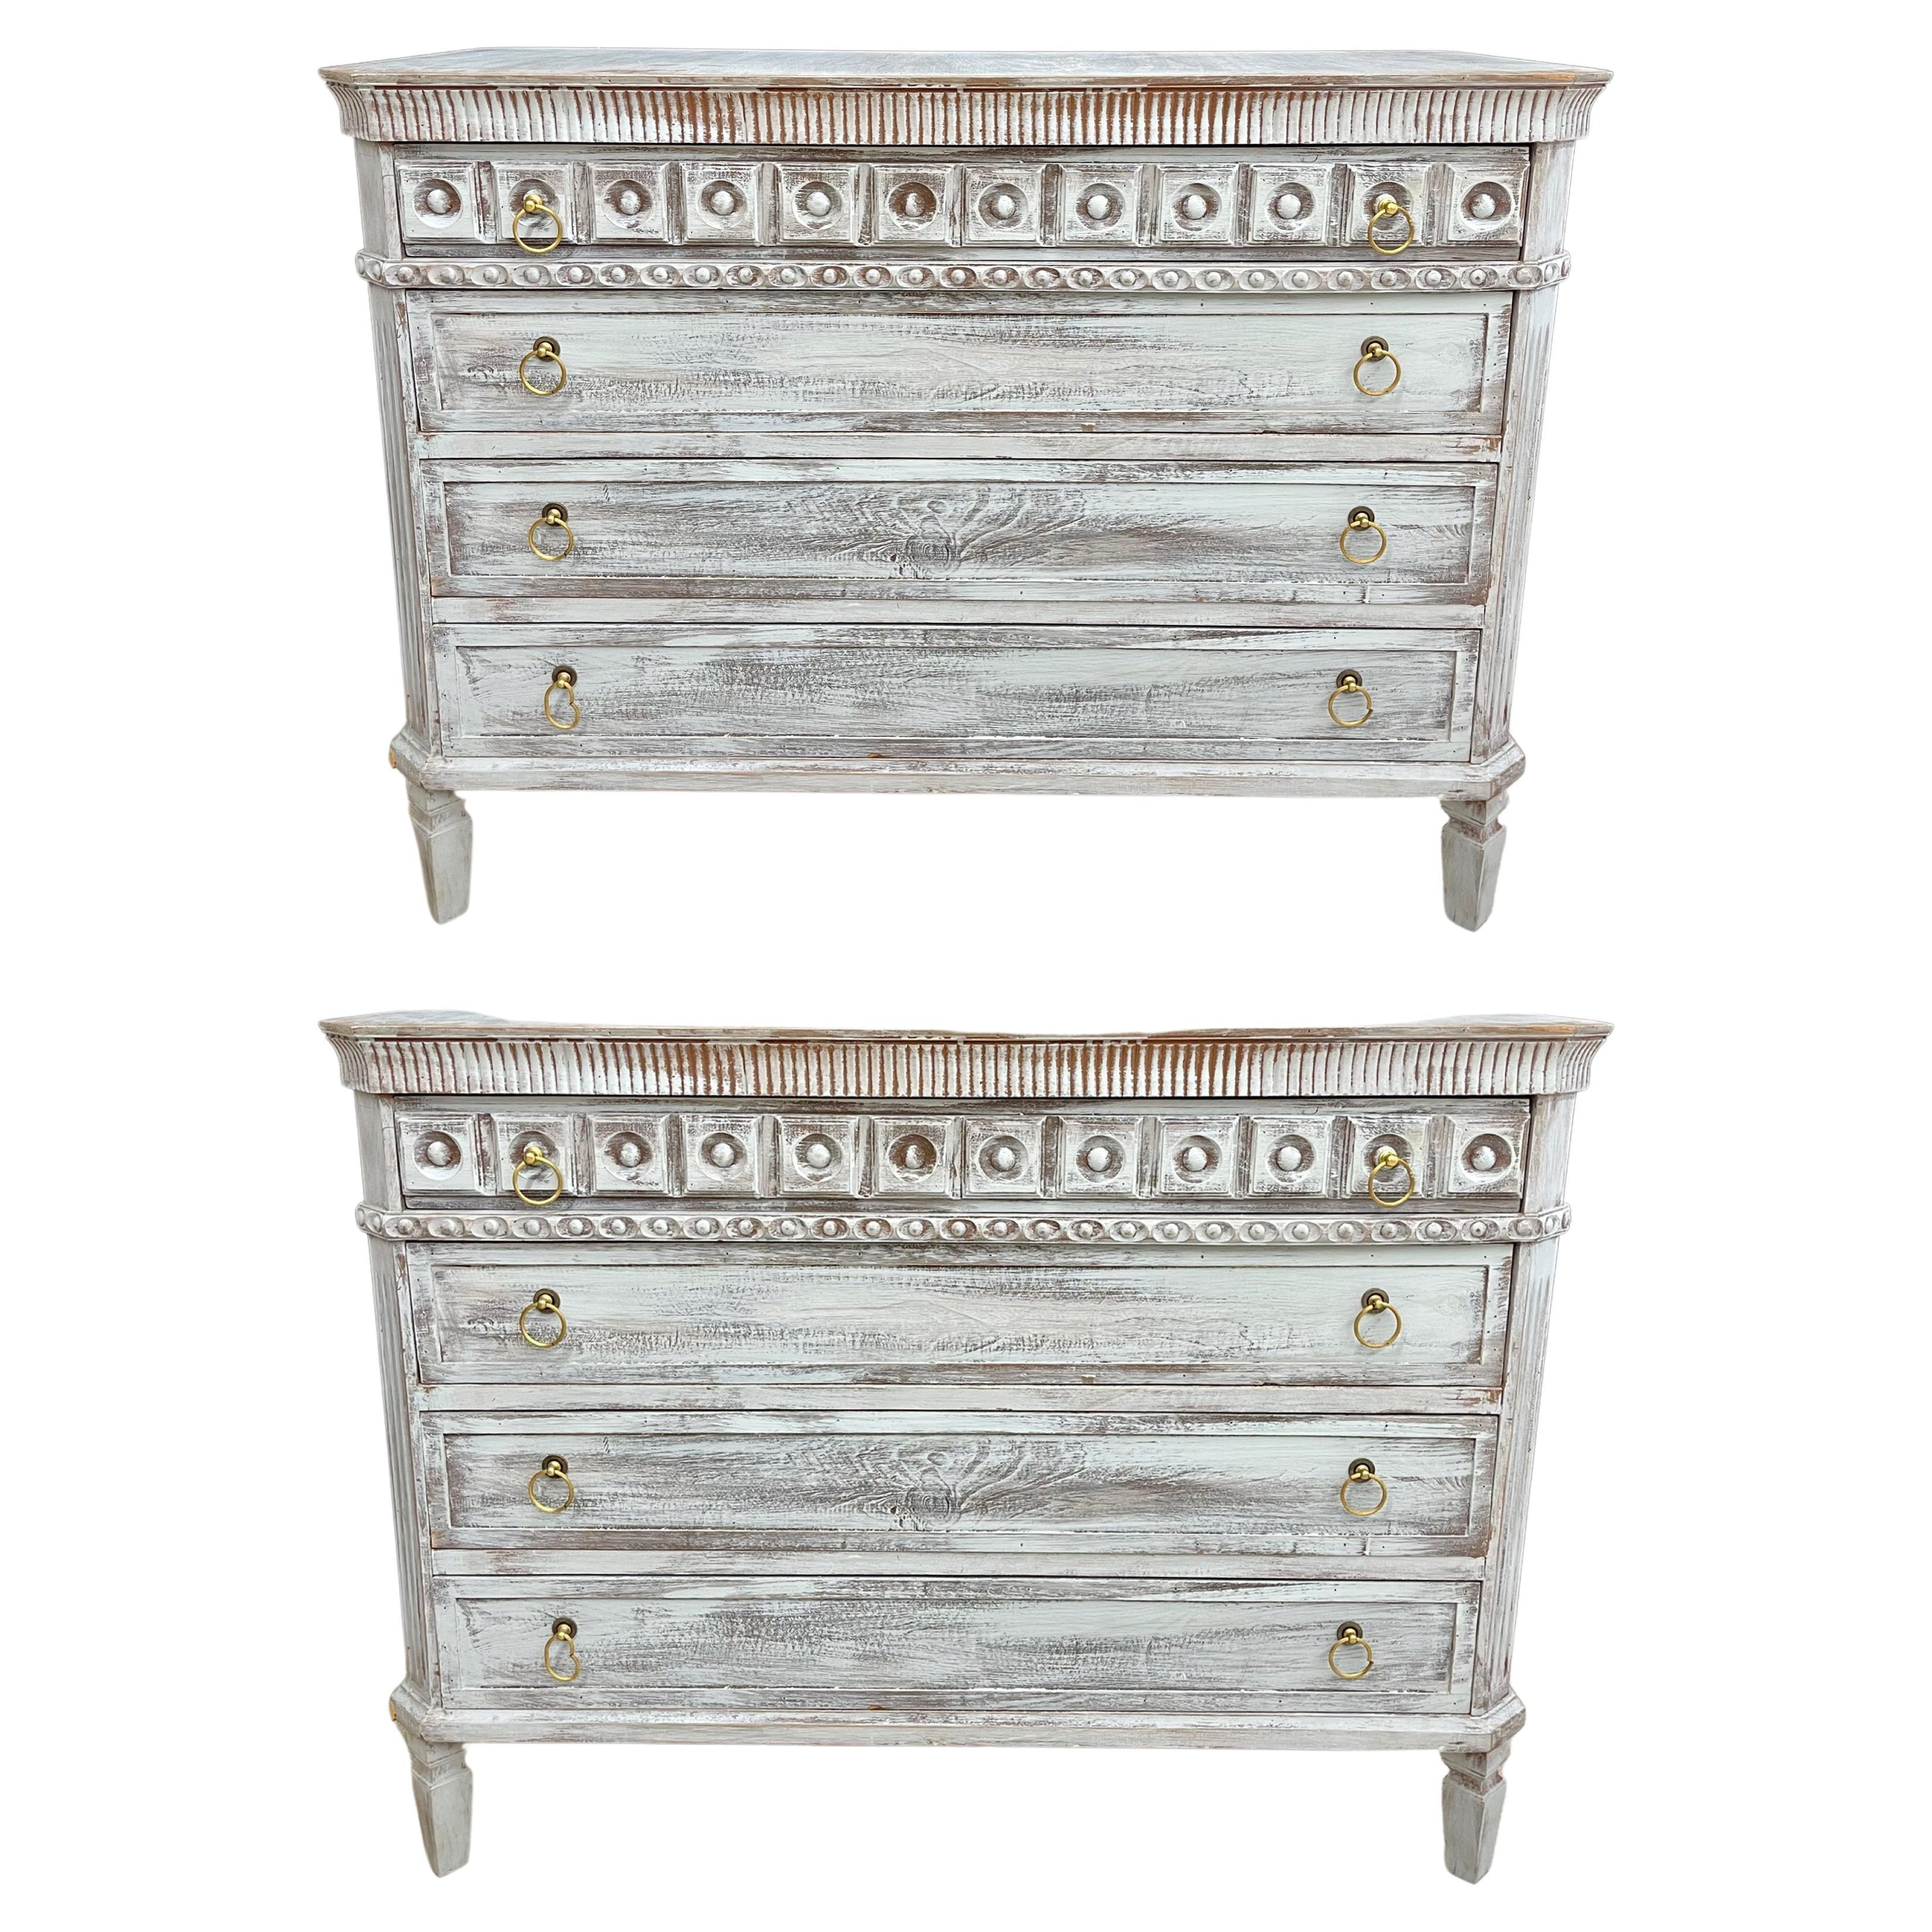 Pair Swedish Style Distress Painted Three-Drawer Commodes Chests or Nightstands